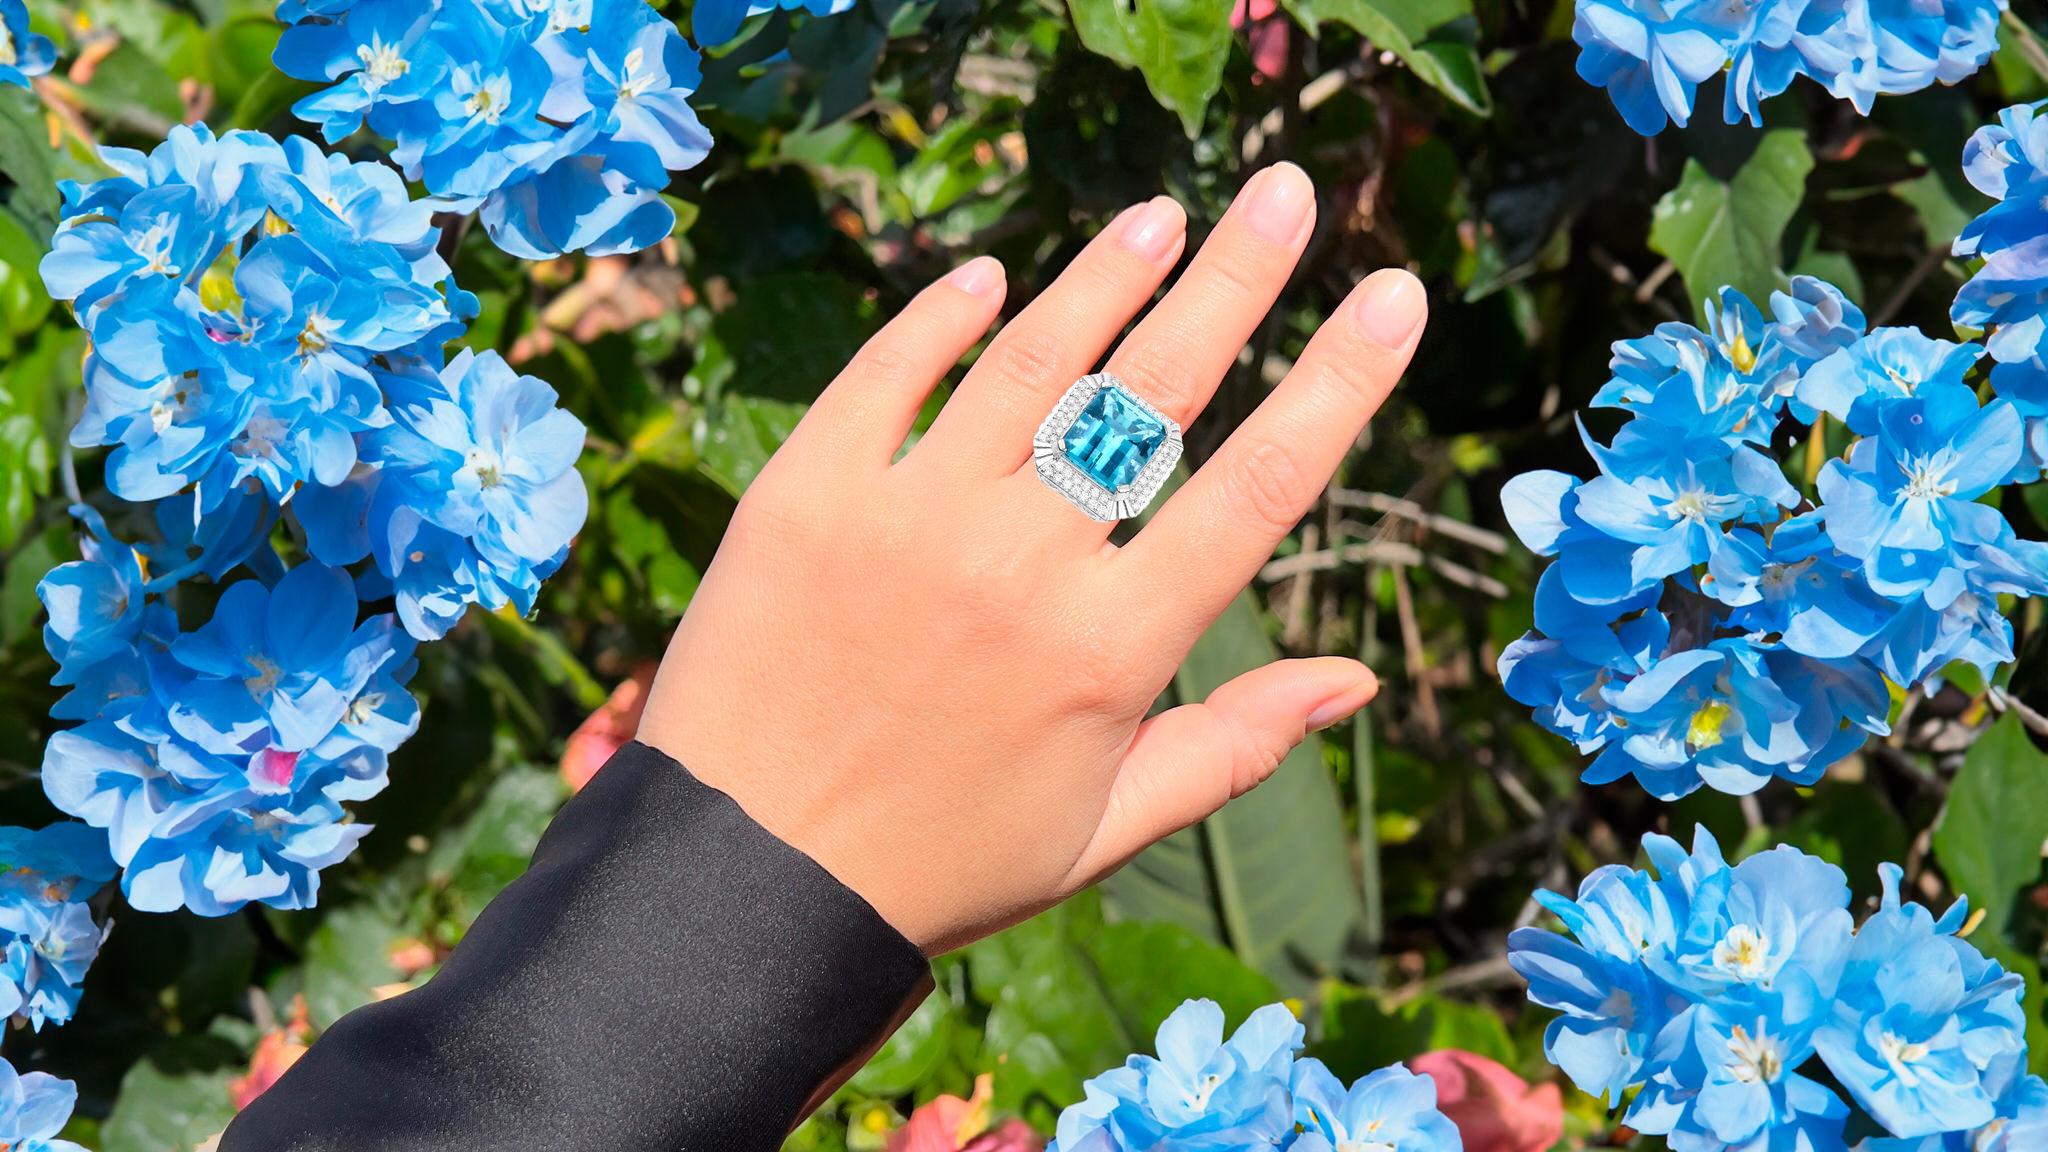 It comes with the original IGI Certificate
All Gemstones are Natural
Aquamarine = 13.15 Carats
Diamonds = 0.84 Carats
Metal: 14K White Gold
Ring Size: 7* US
*It can be resized complimentary